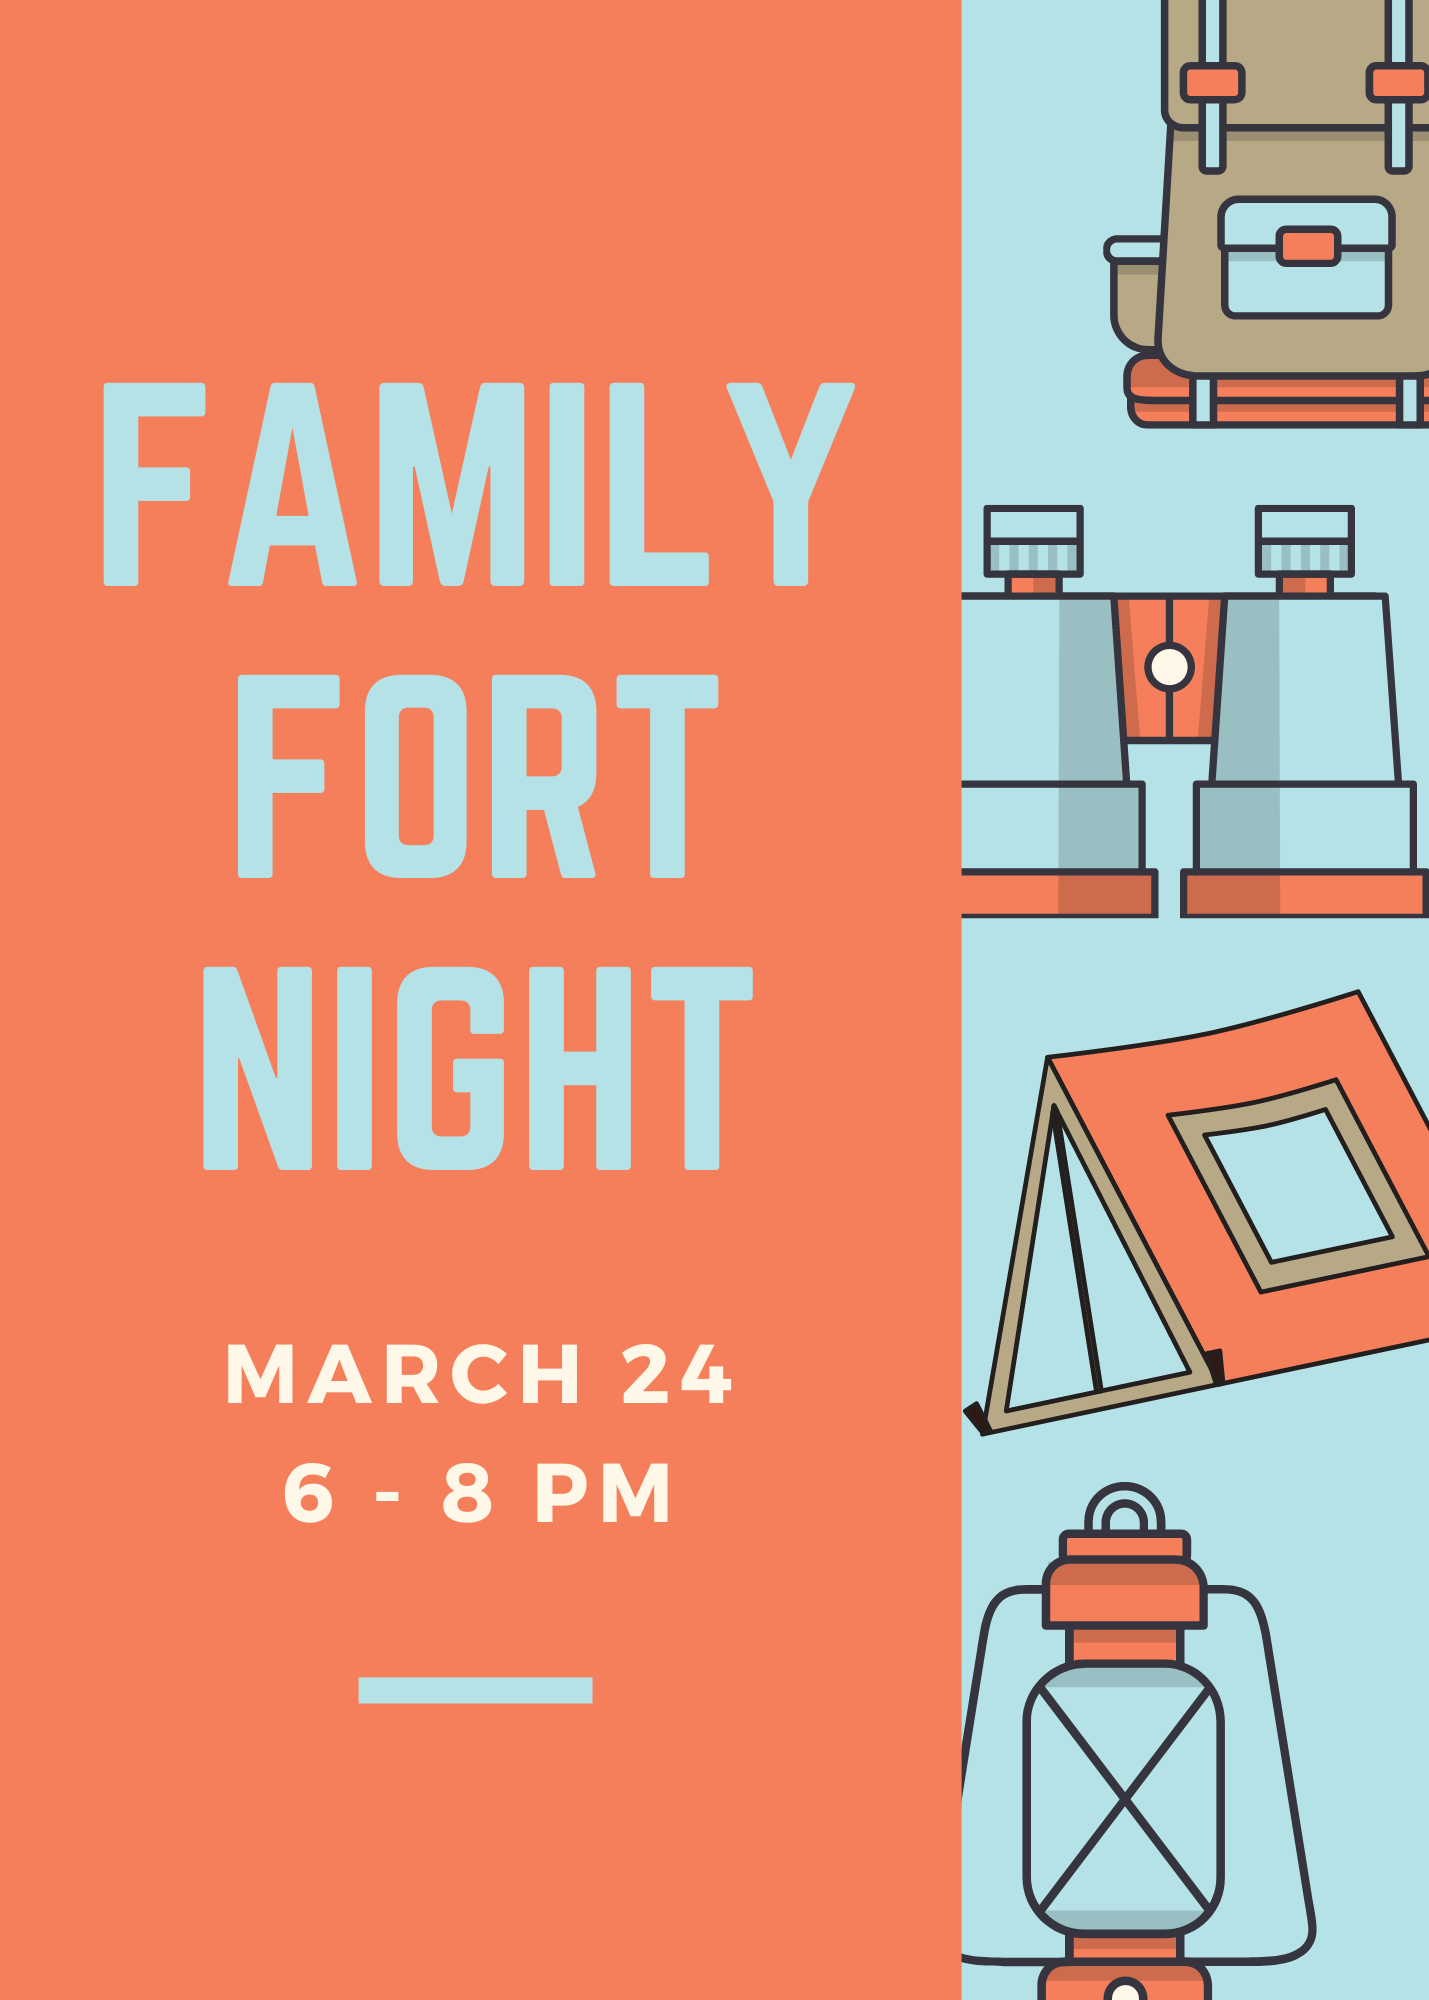 Camping item images and Orange Background with text : Family Fort Night March 24 6- 8 PM 